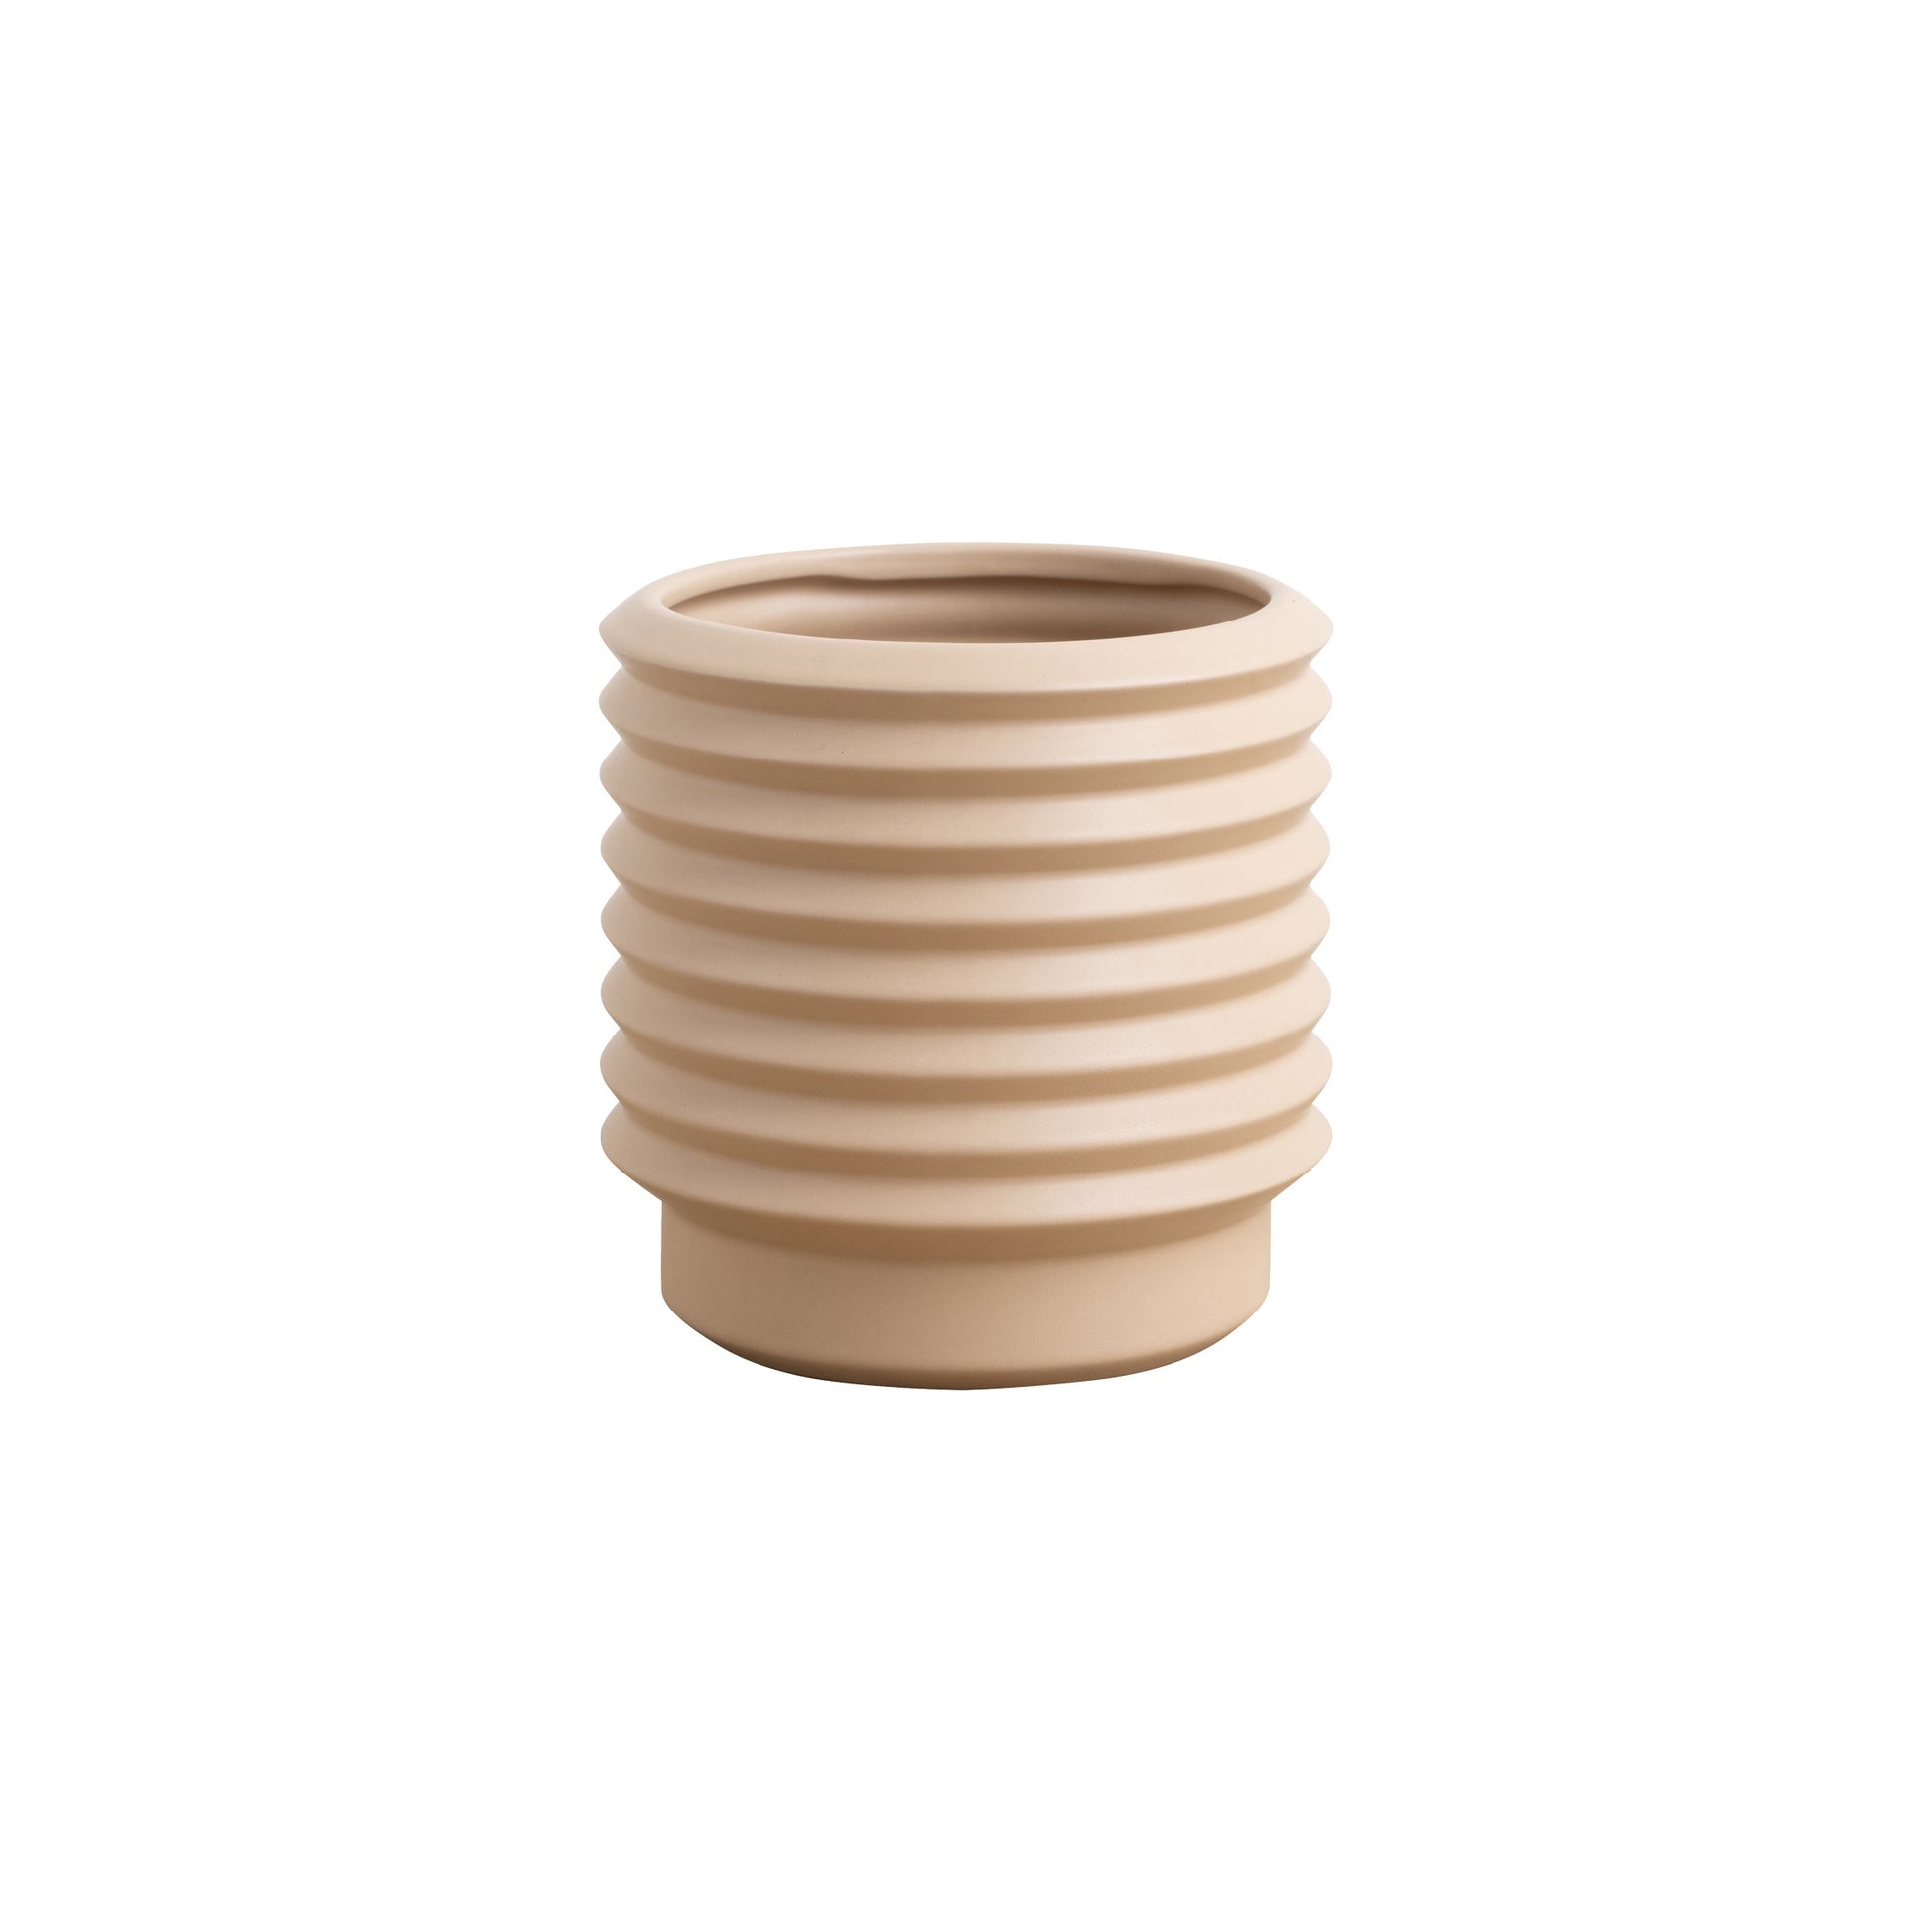 The Berlin planter is a beautifully textured stoneware pot complete with internal drainage saucer.  Colour: nude  Dimensions: 15cm high x 12cm diameter